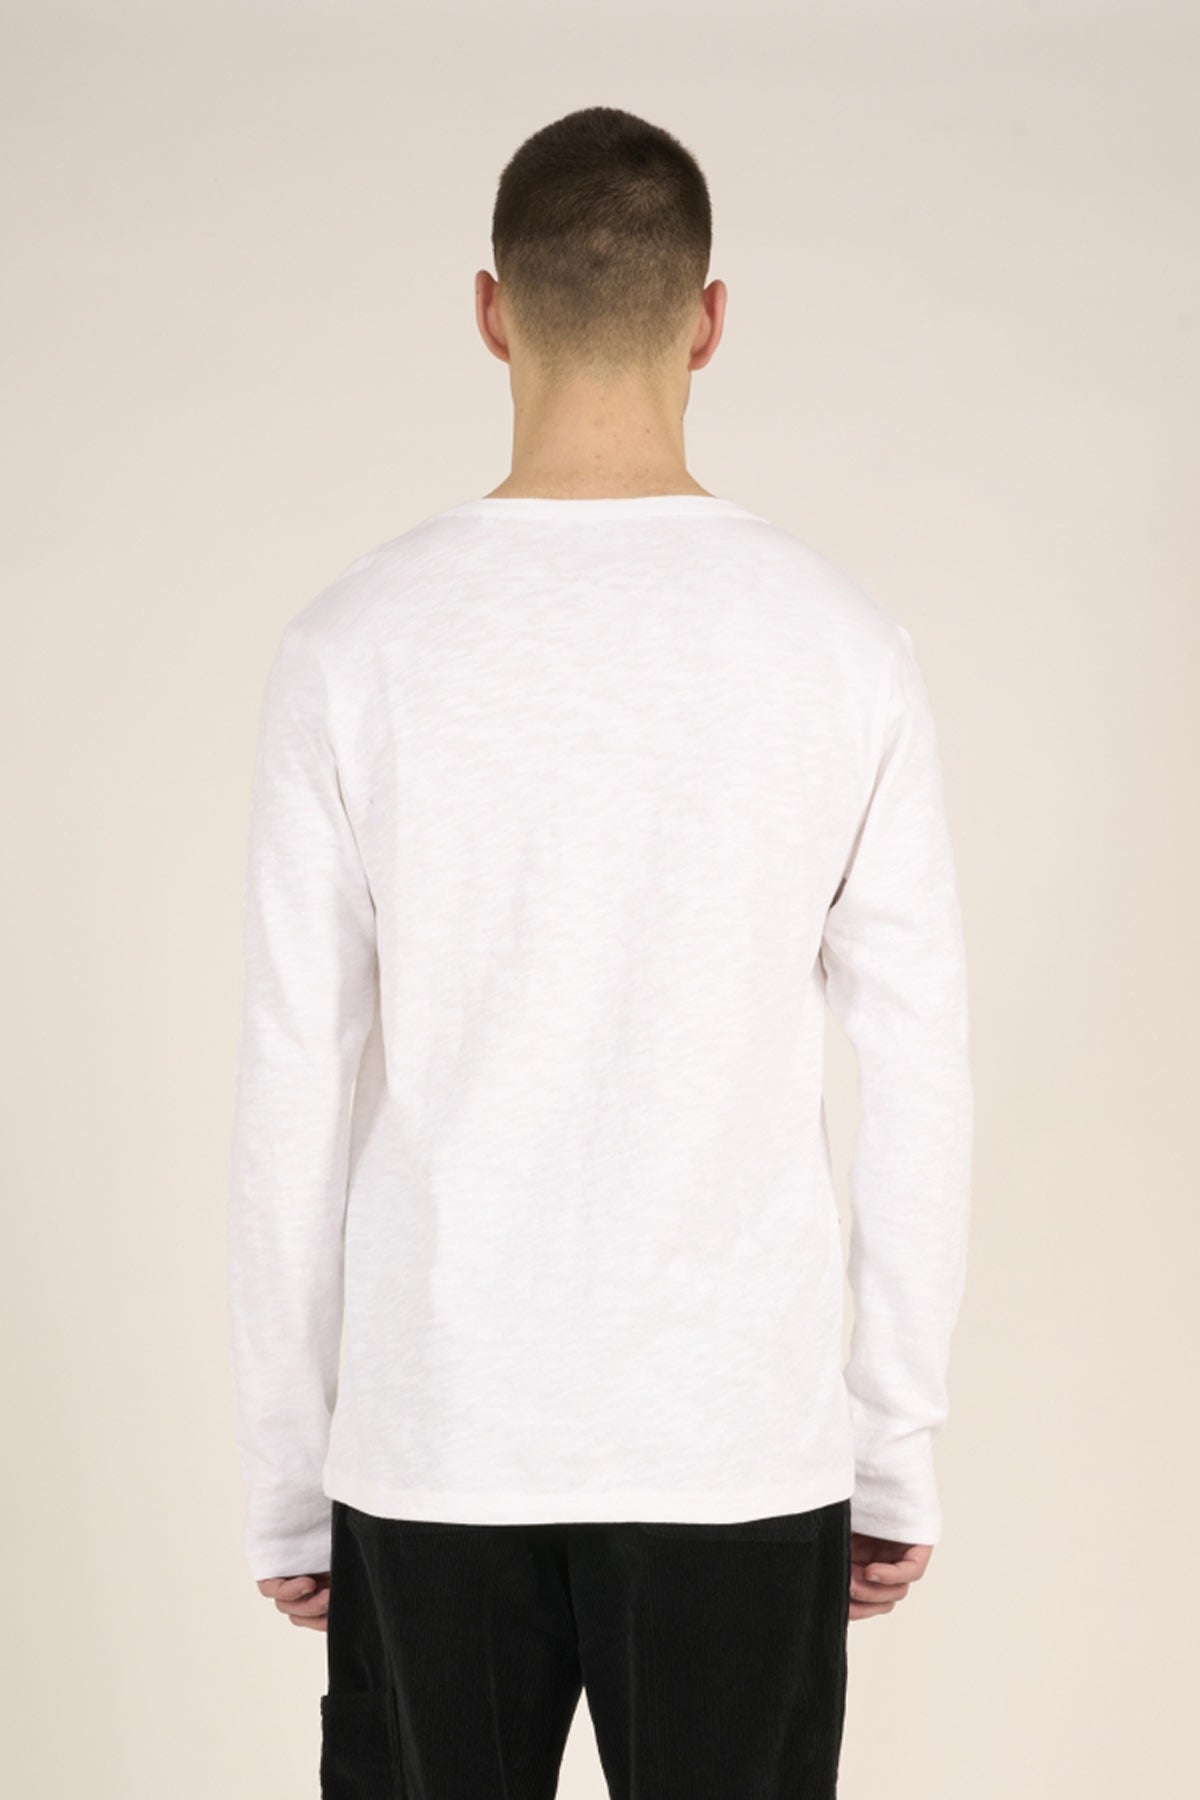 T-Shirt Slope long sleeve - Knowledge Cotton Apparel